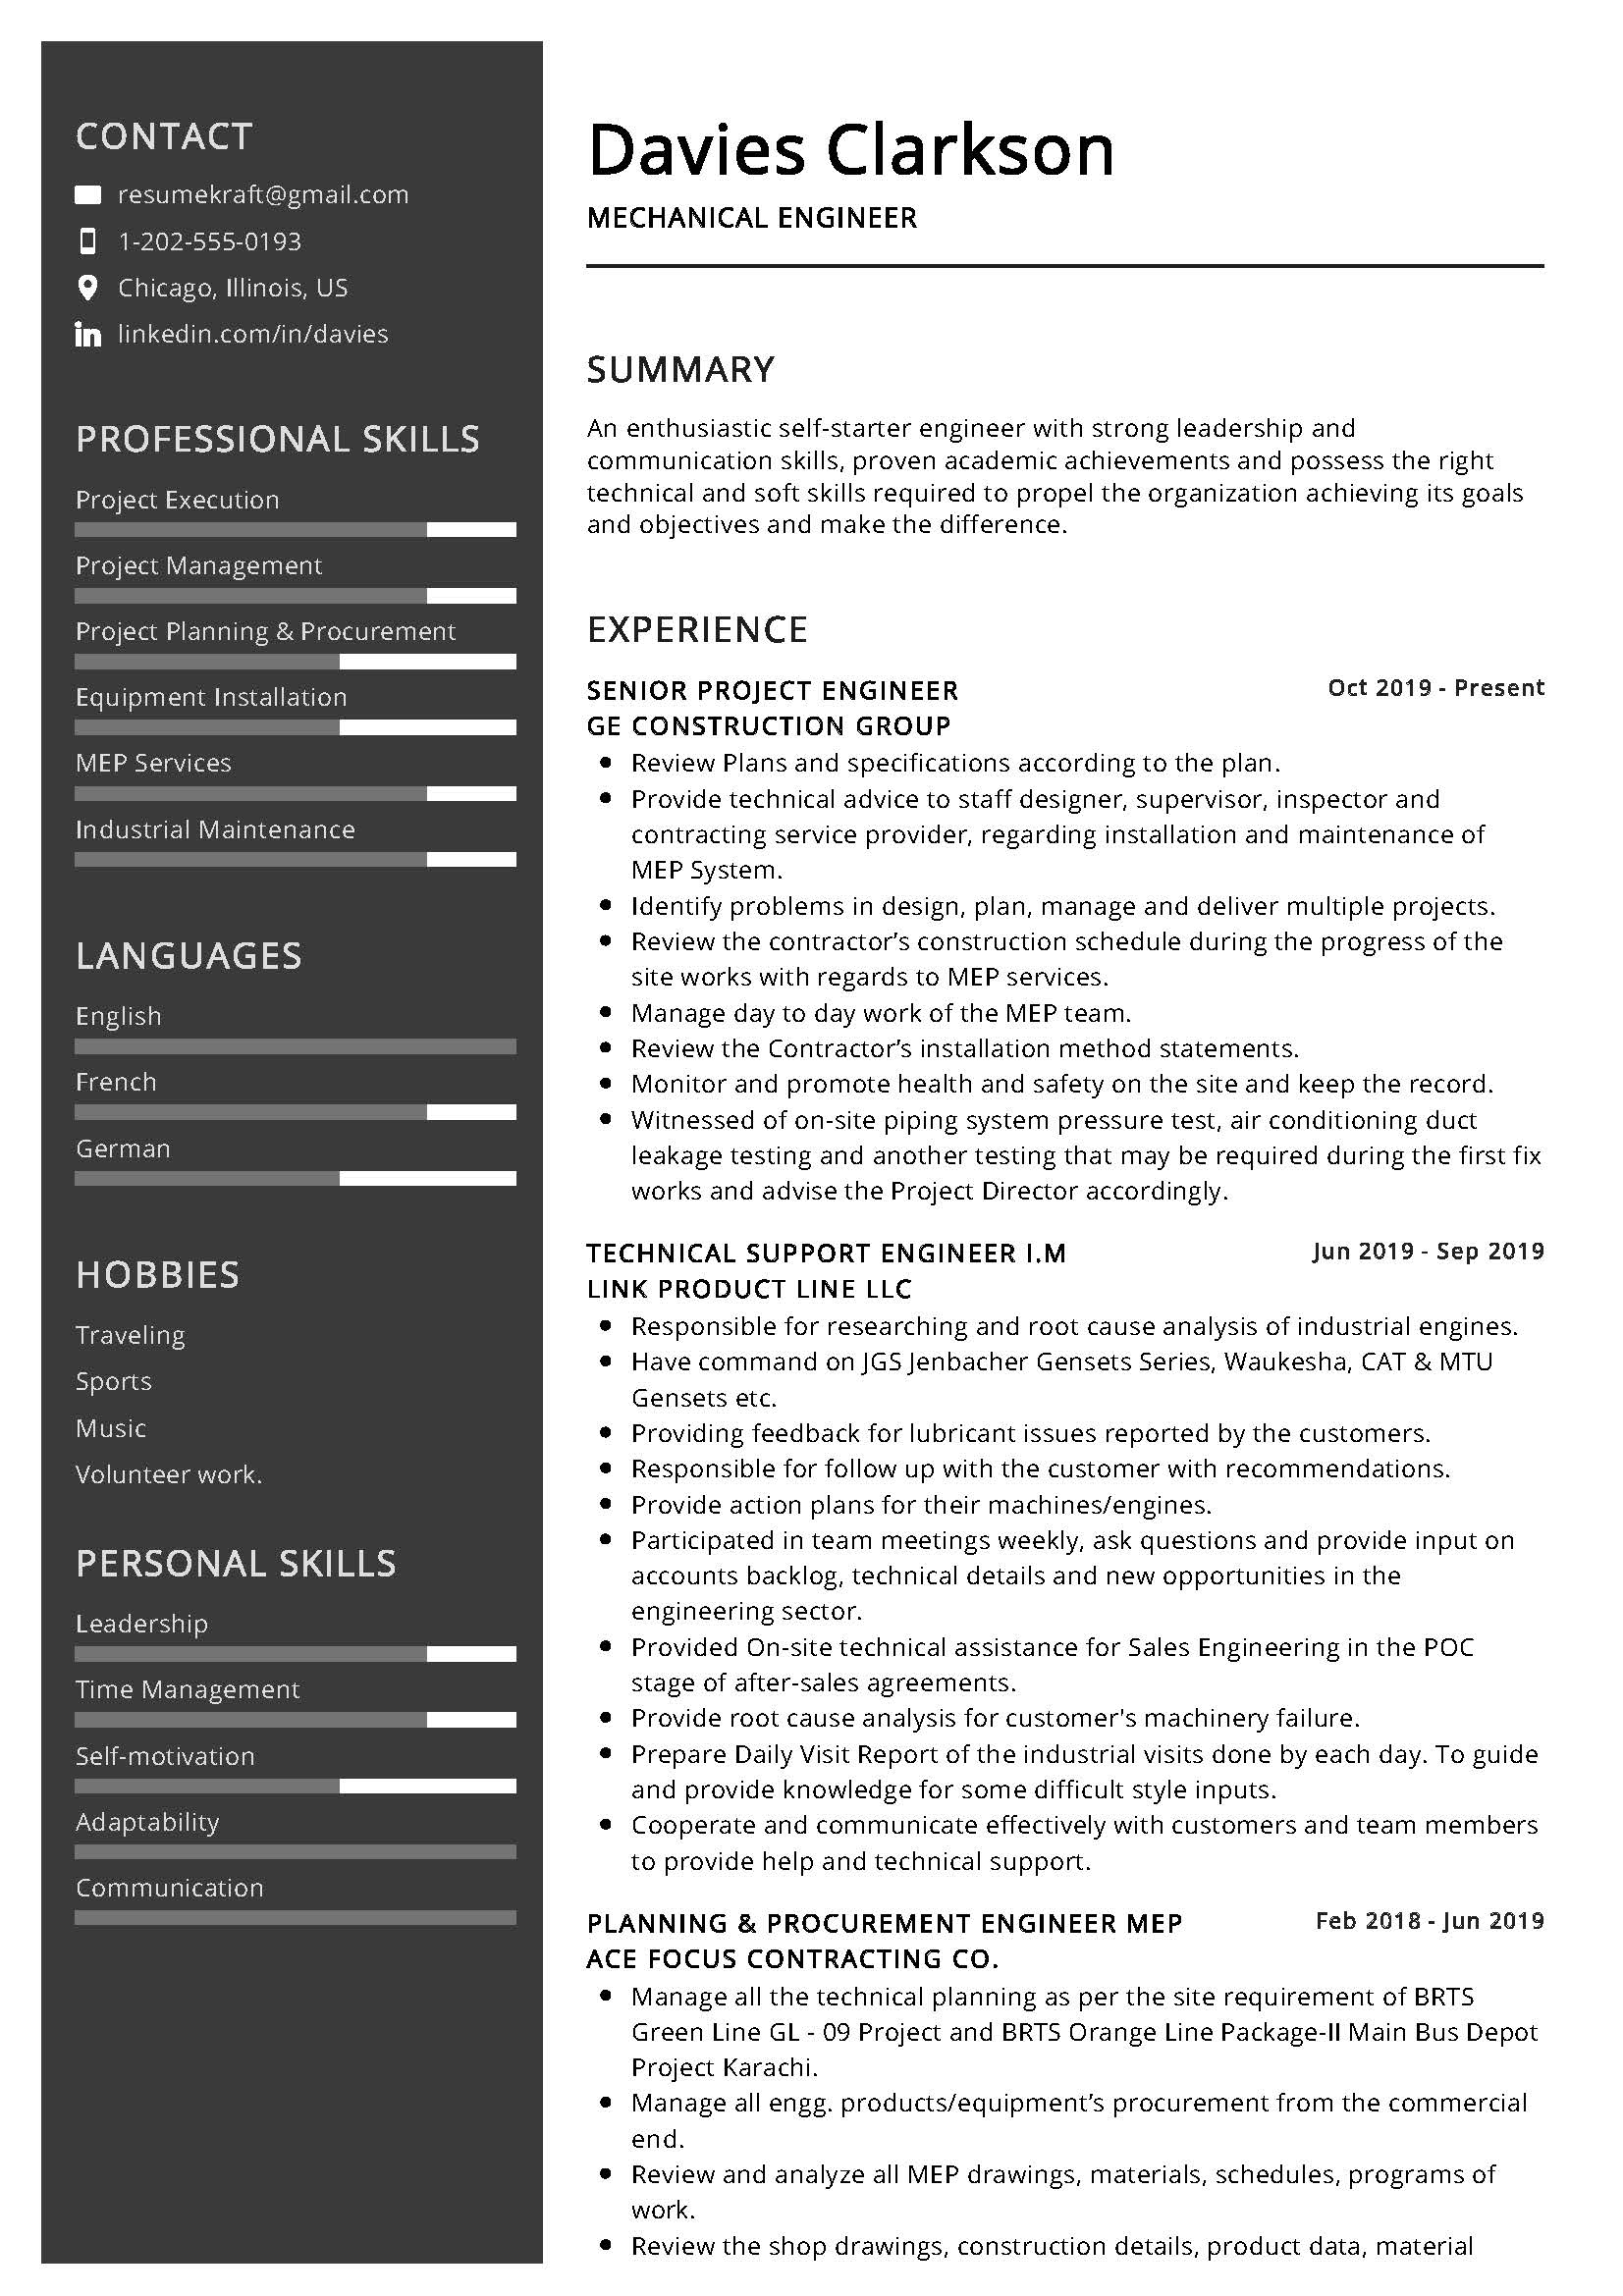 Mechanical Engineer Resume Sample & Writing Tips 10 - ResumeKraft With Regard To Mechanical Engineer Job Description Template Pertaining To Mechanical Engineer Job Description Template